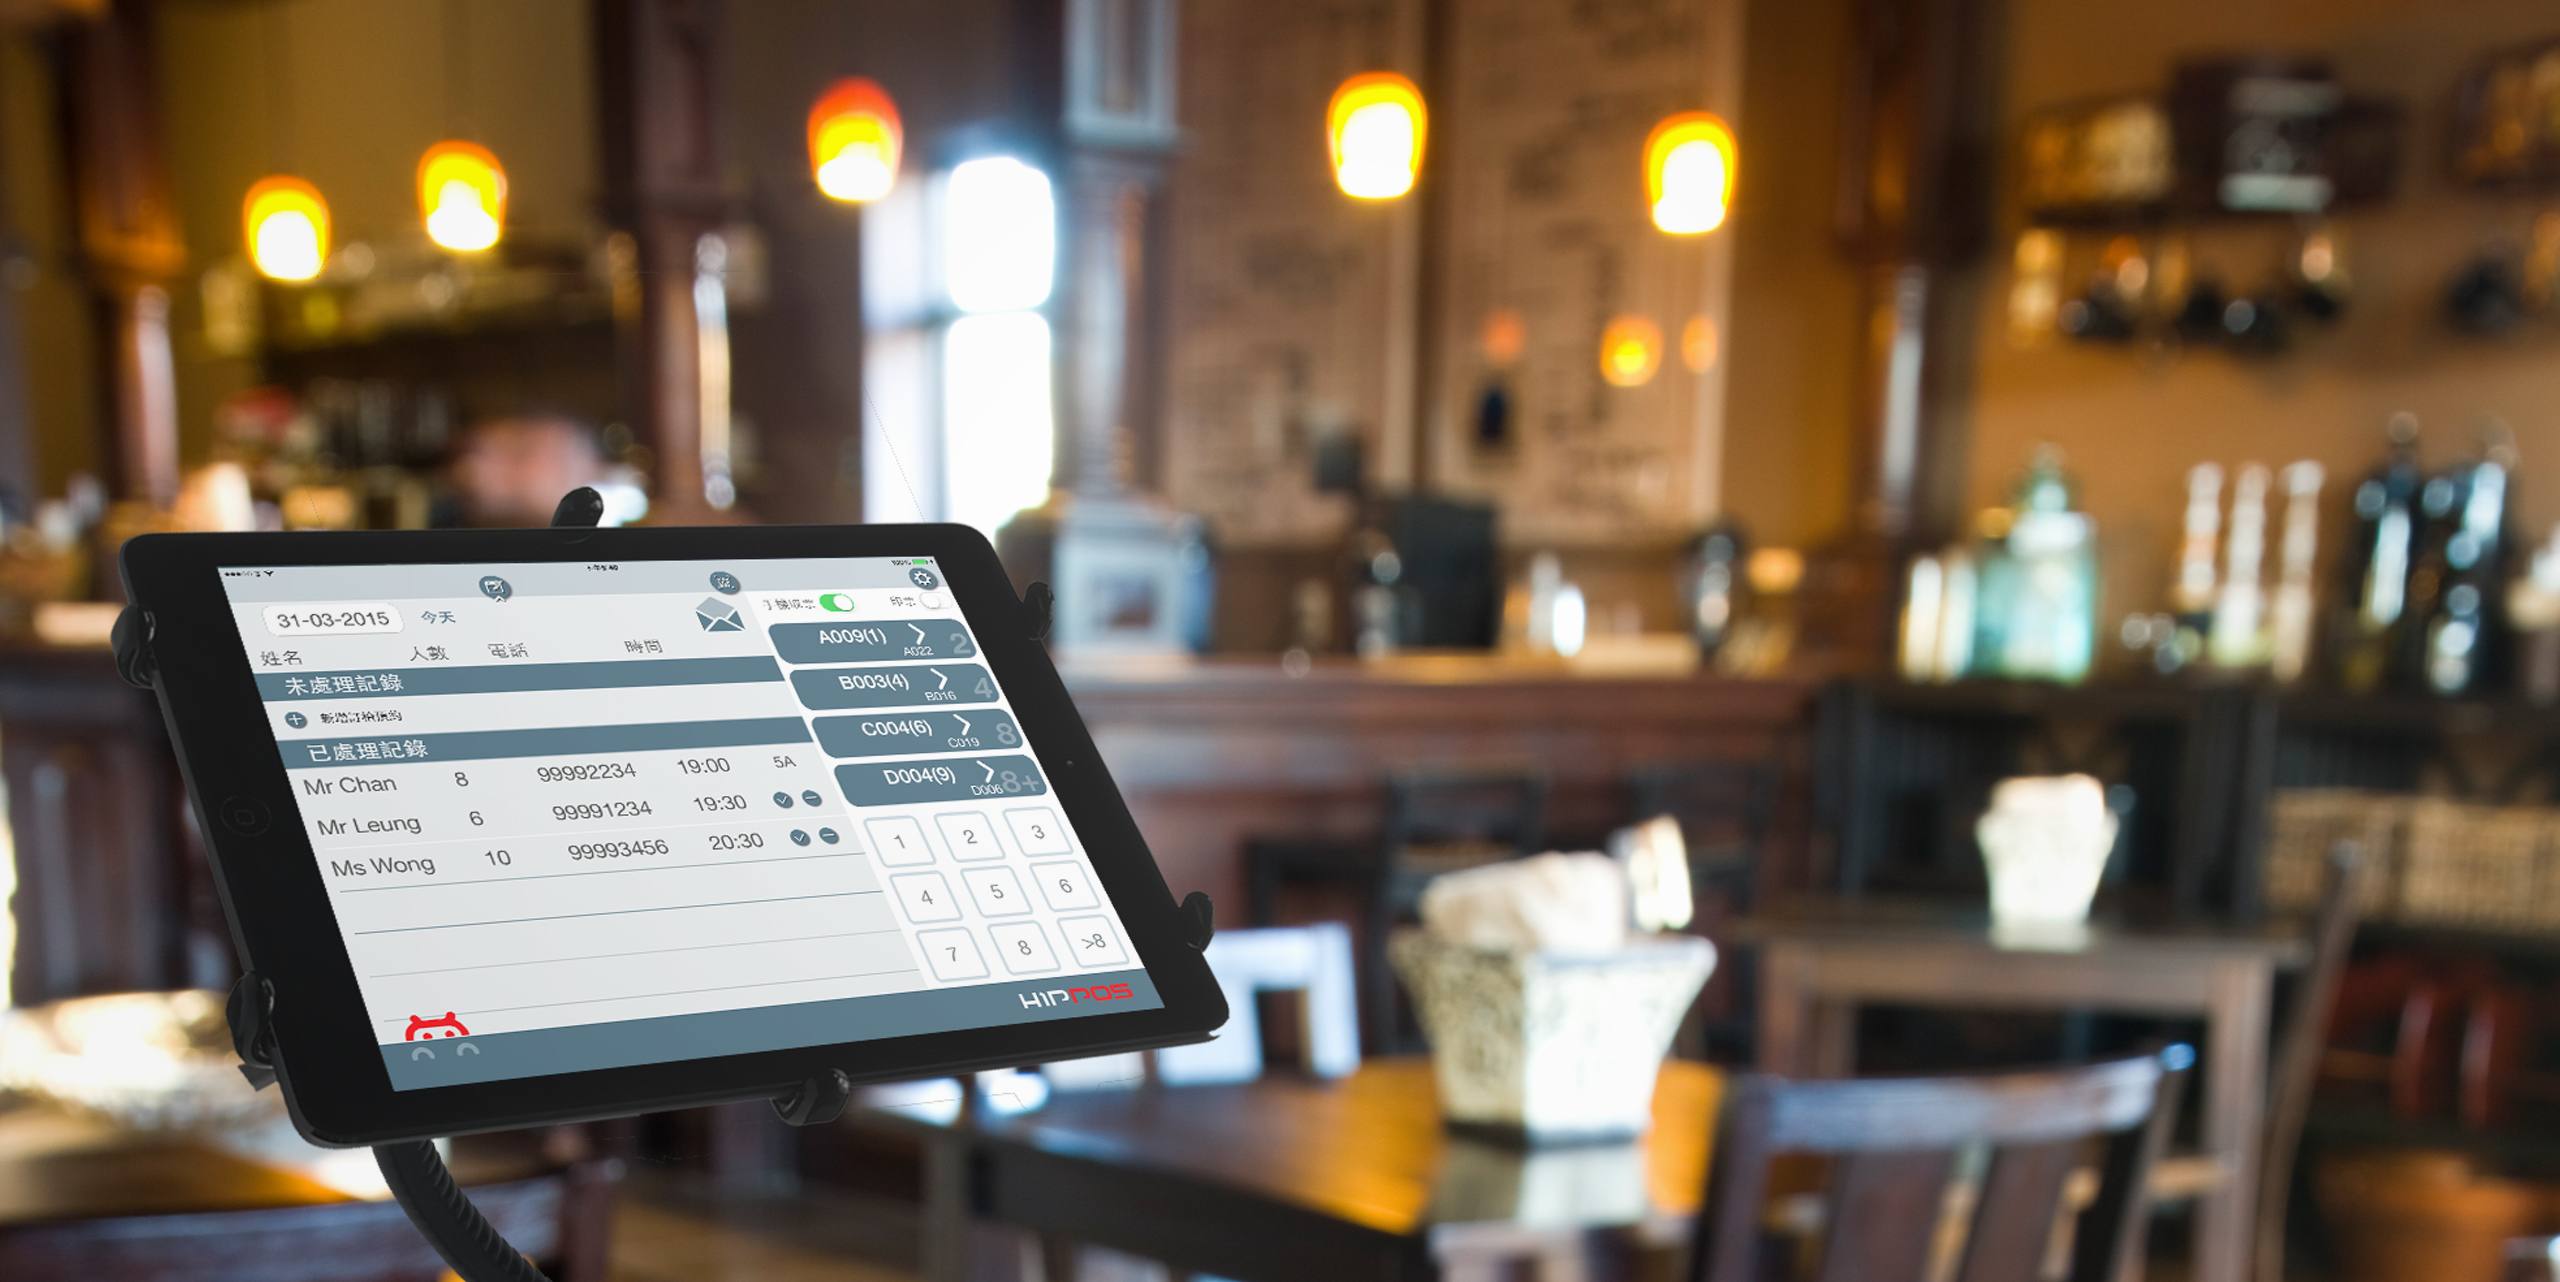 And example of restaurant pos software in a restaurant